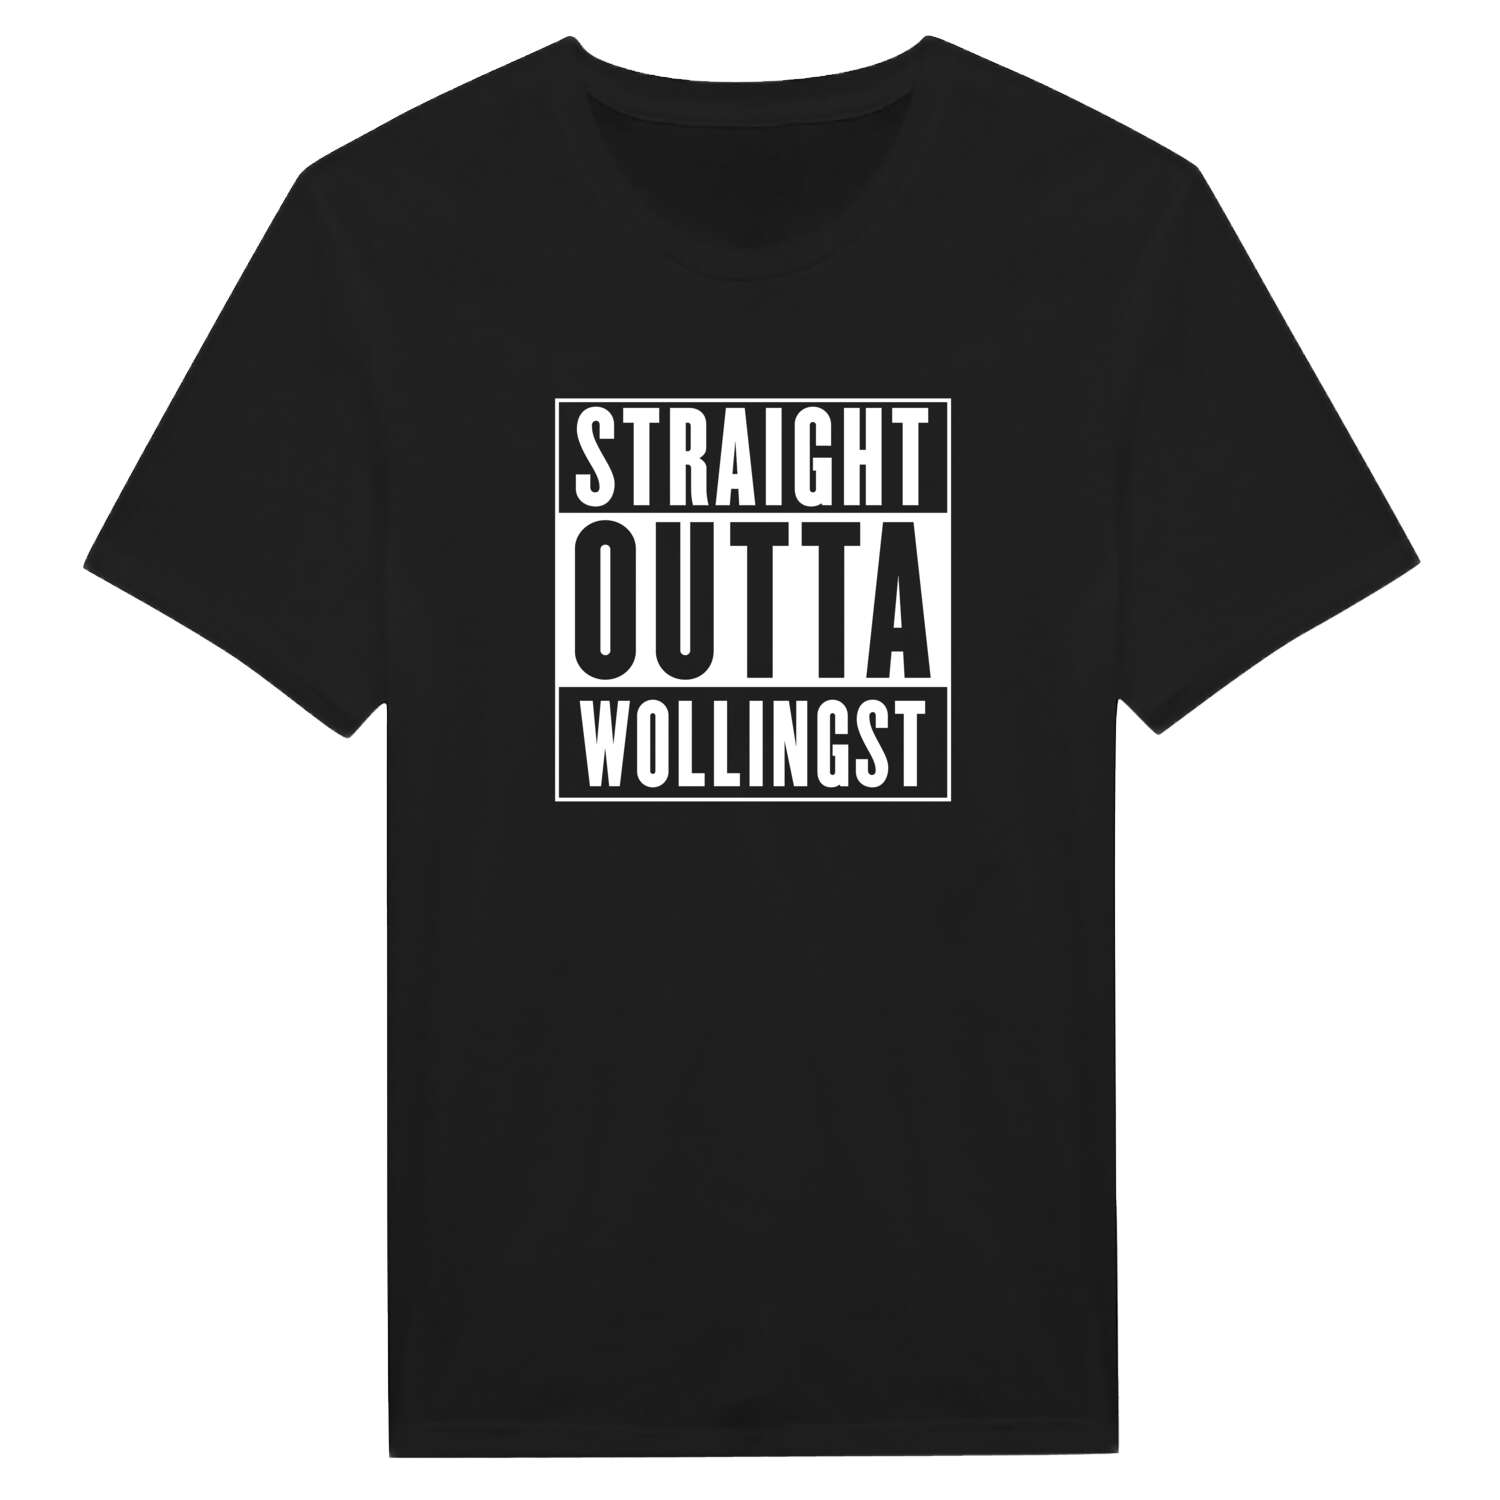 Wollingst T-Shirt »Straight Outta«